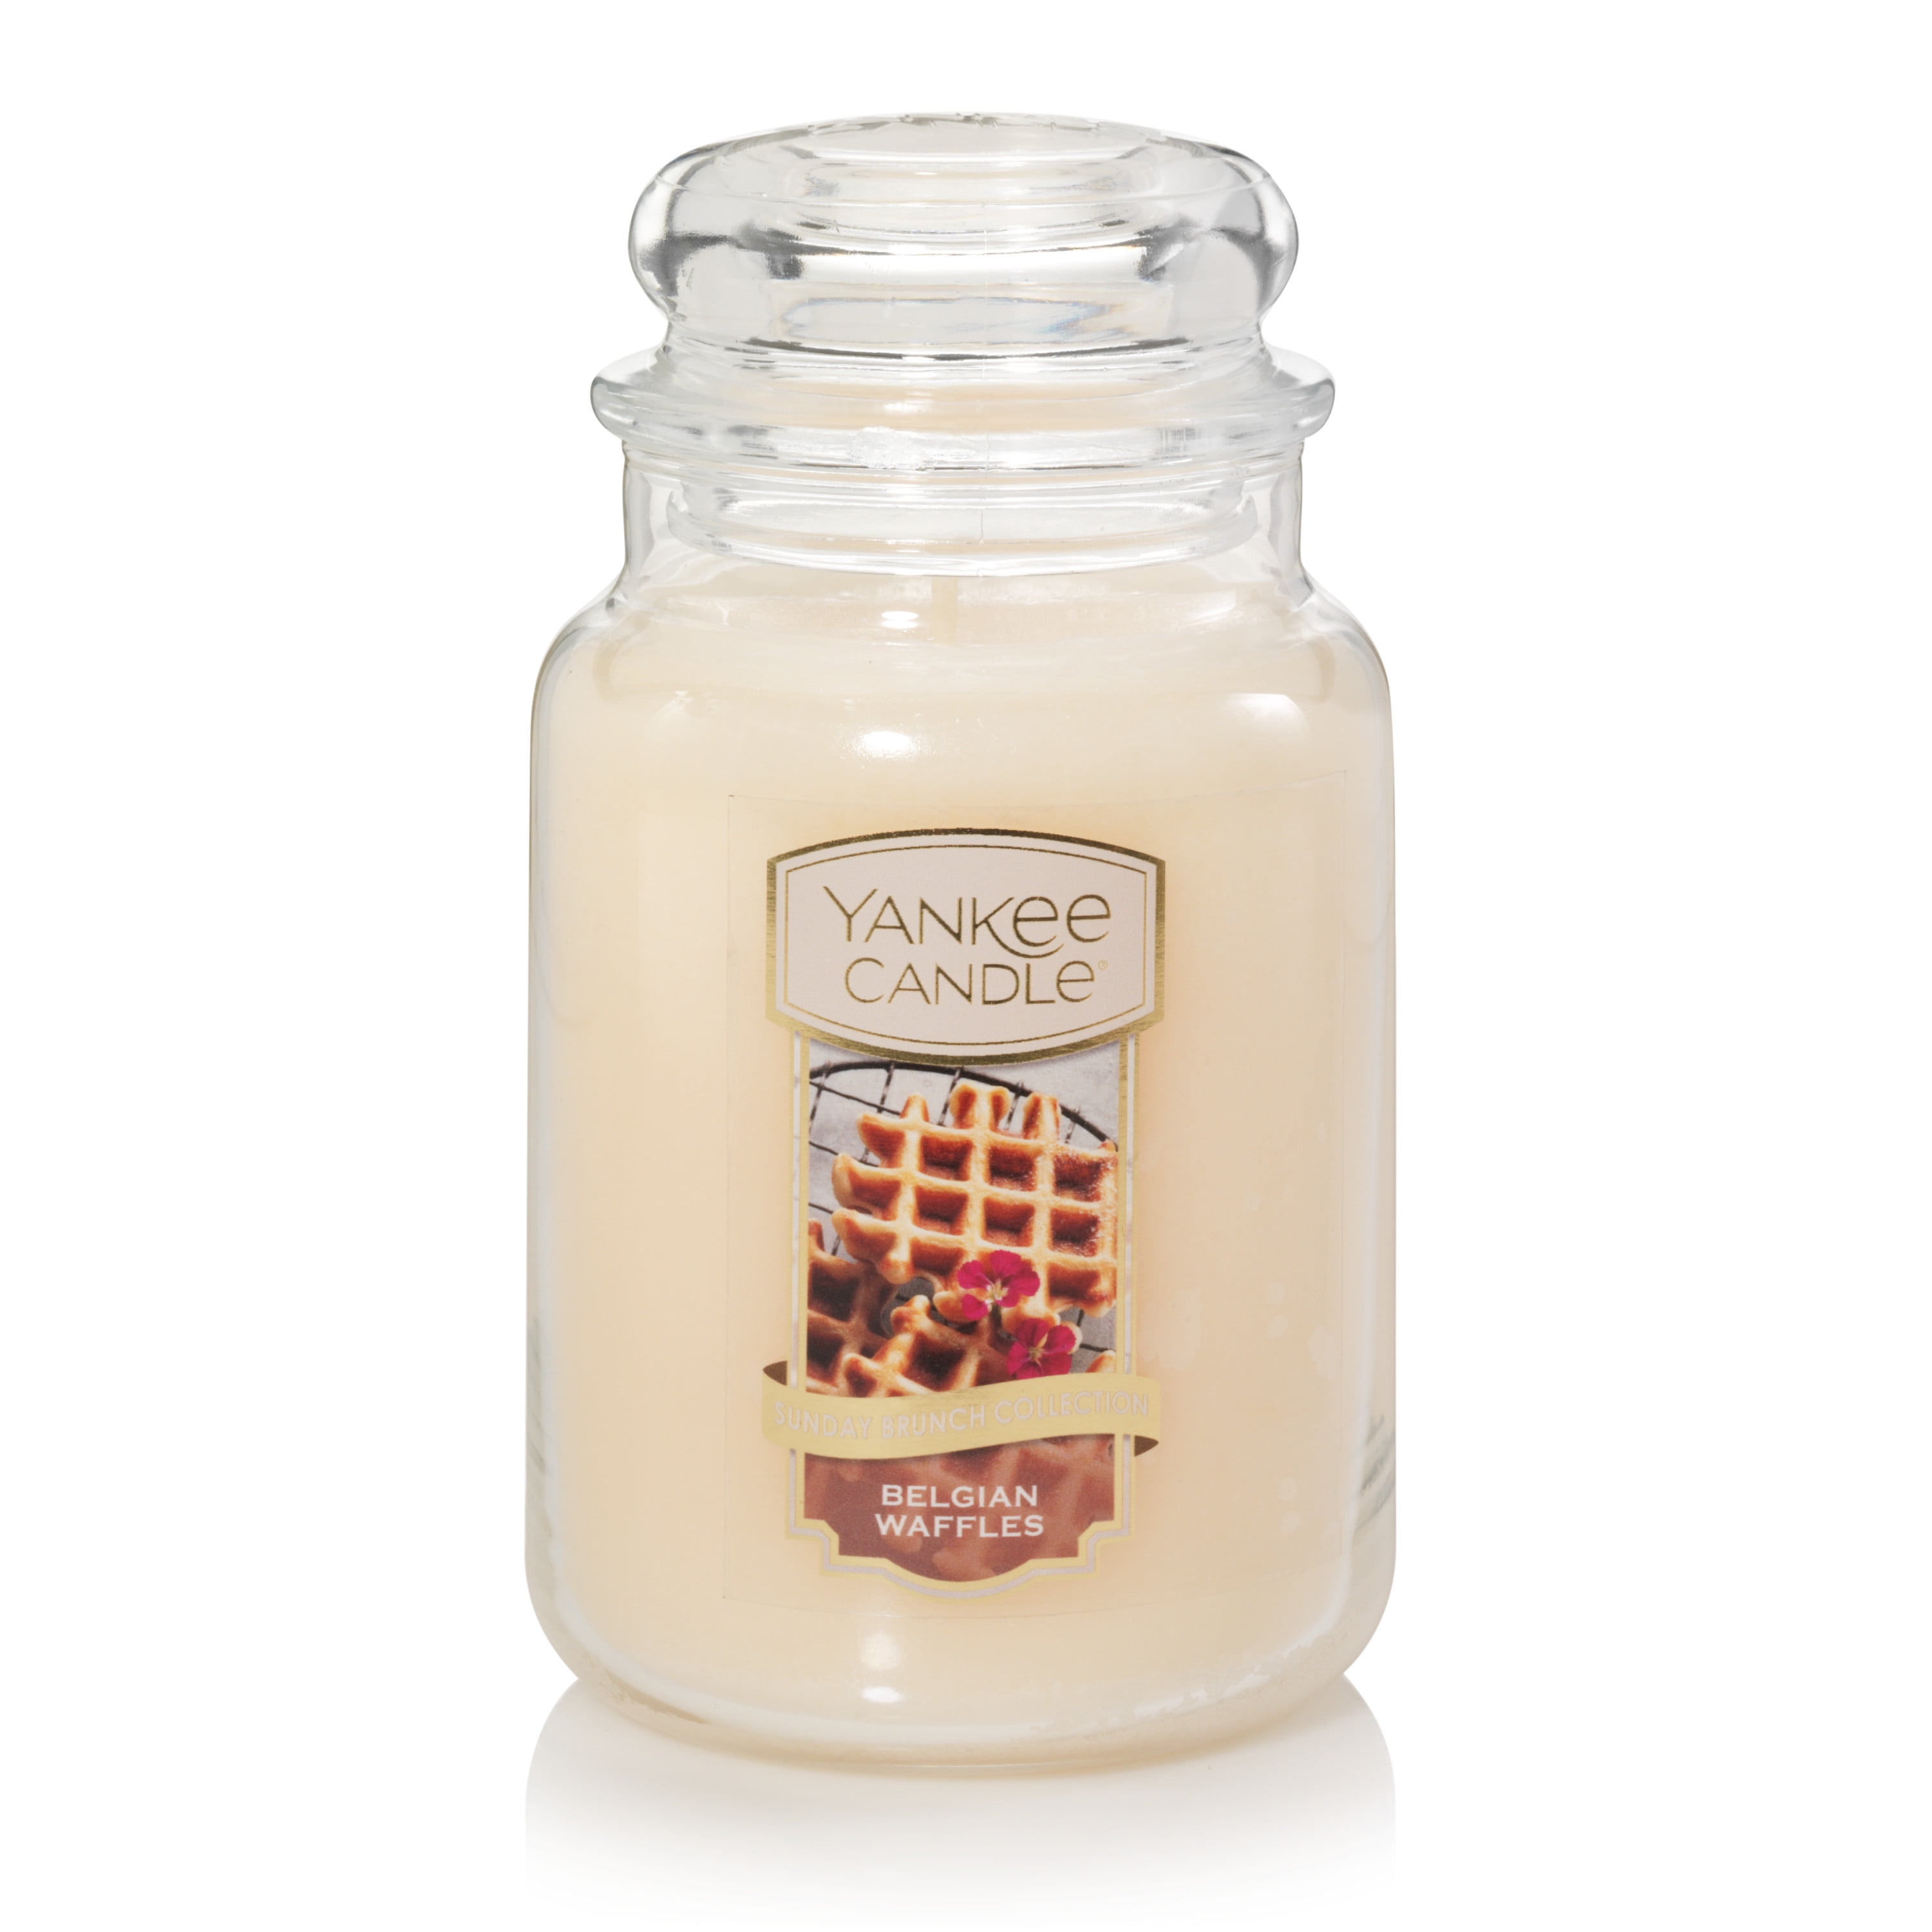 Yankee Candle Grilled Peaches & Vanilla Large Scented Candle 22 oz 